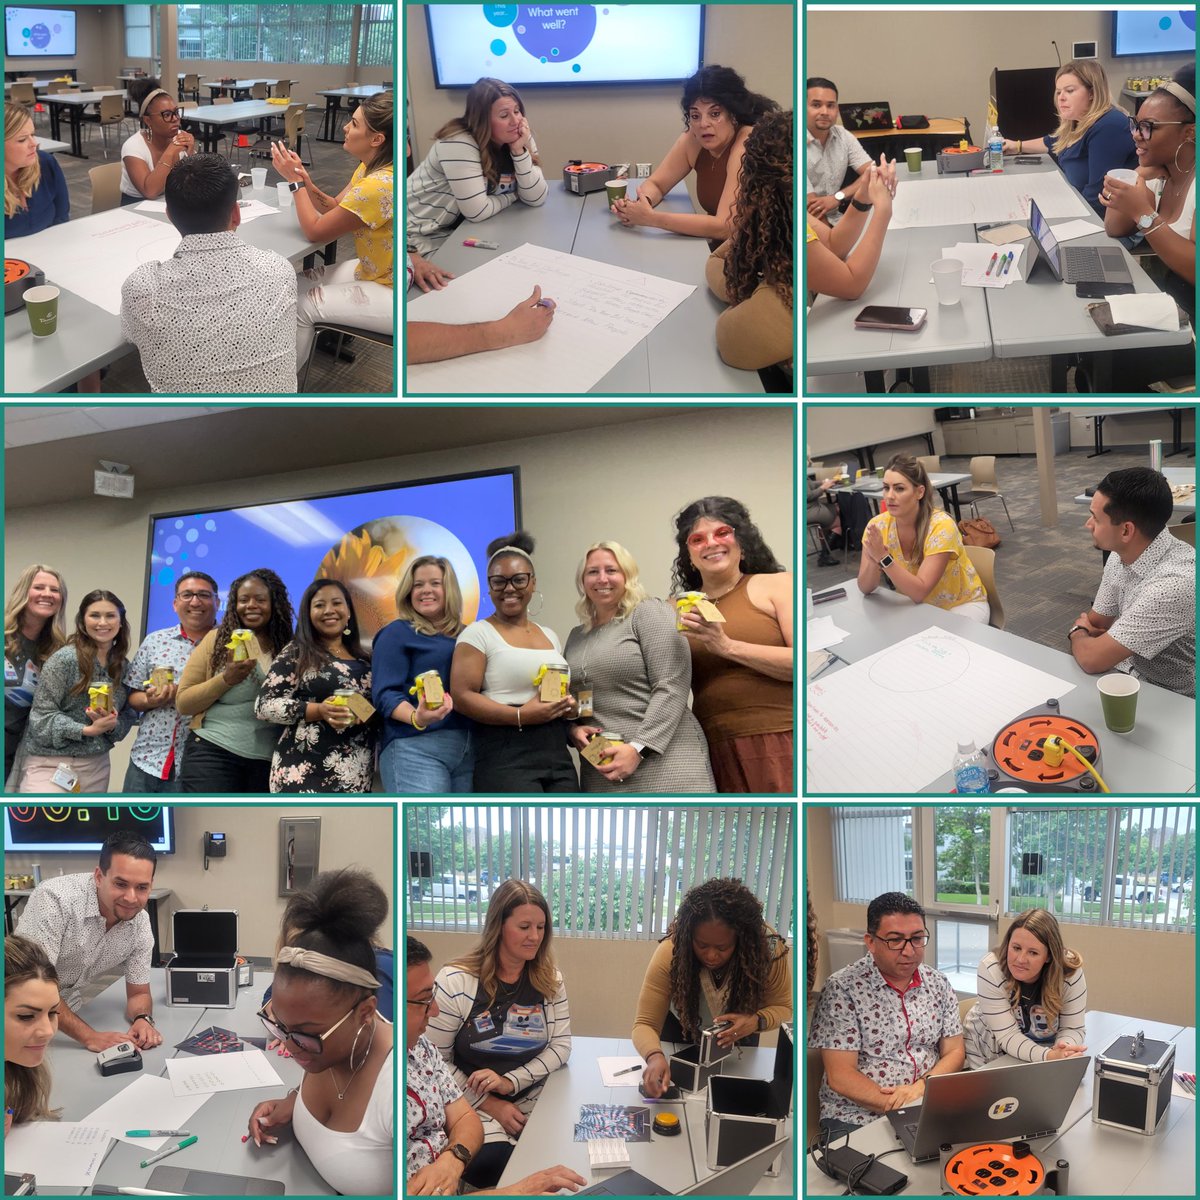 Our #ComputerSciencePLN wrapped up another great year with  great community building. This group of individuals is beyond amazing! Thank you for broadening computer science access and participation in the Inland Empire!